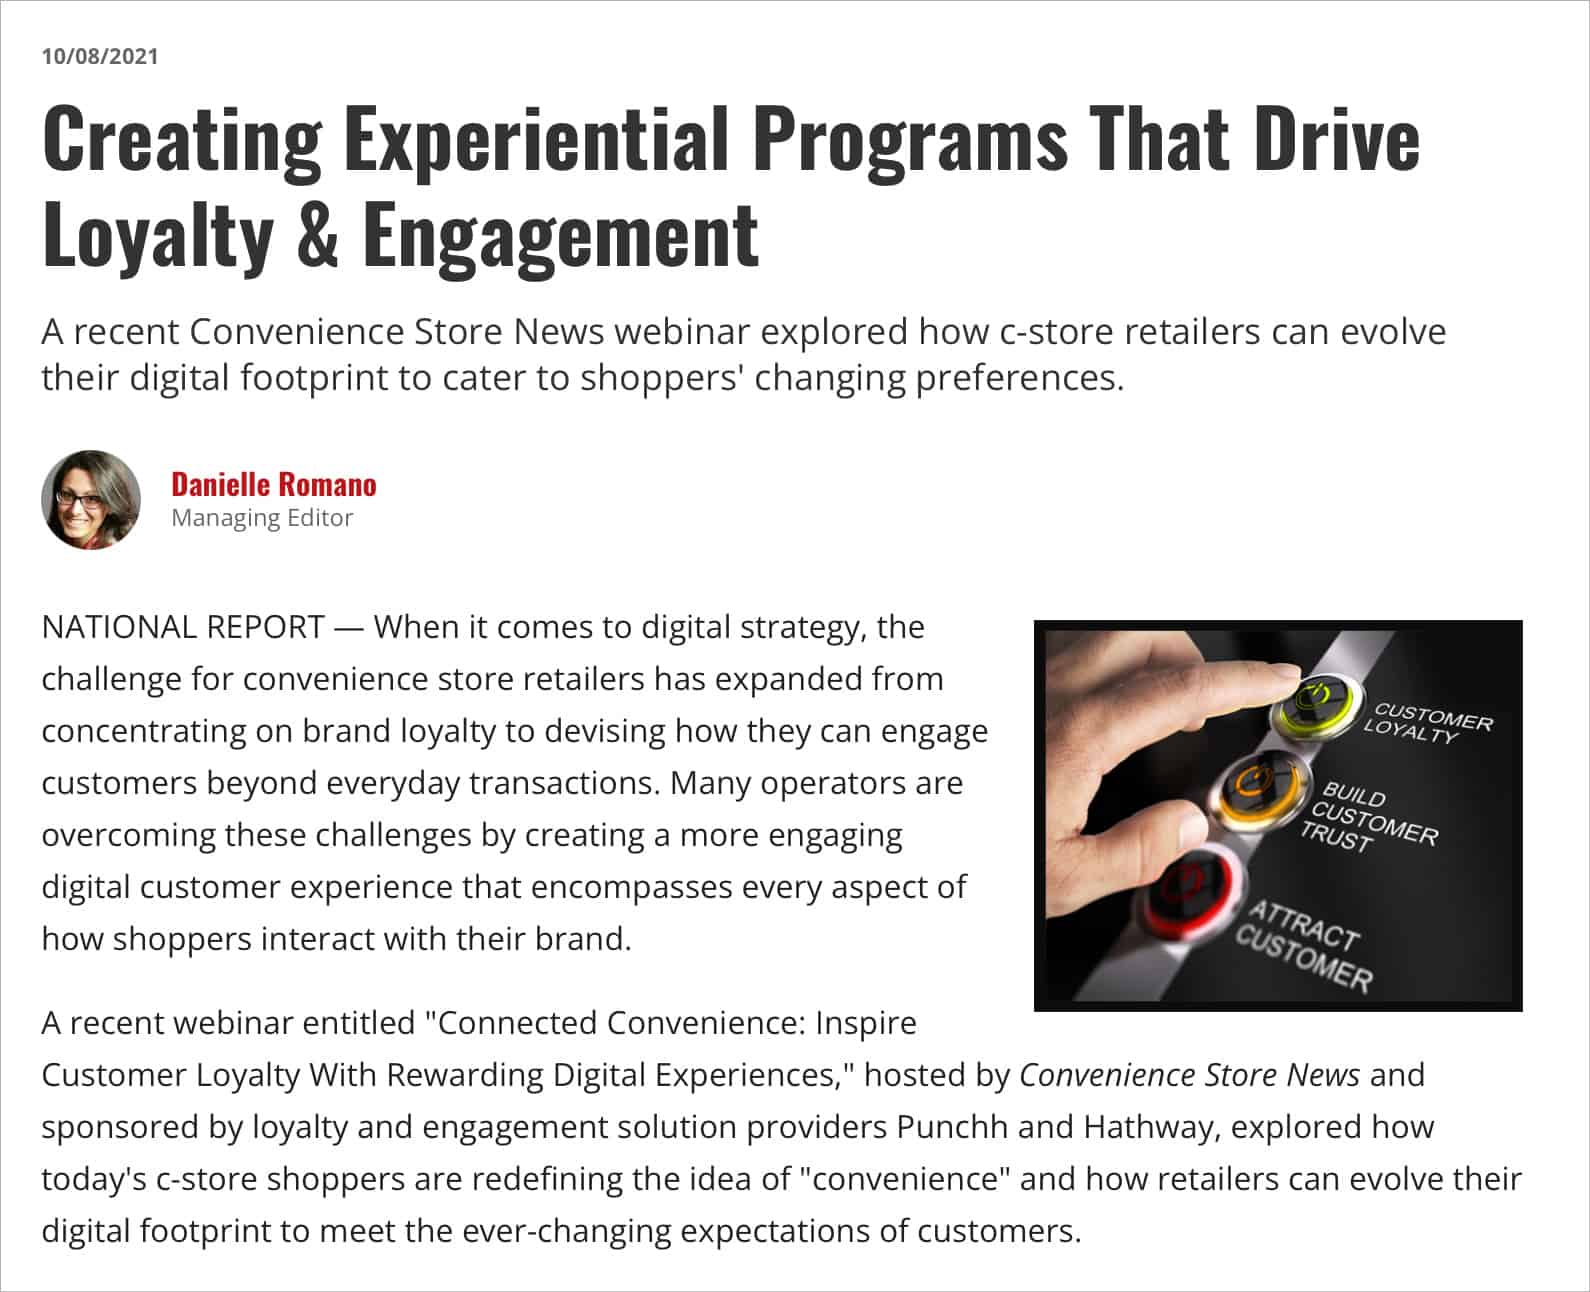 Creating Experiential Programs That Drive Loyalty & Engagement